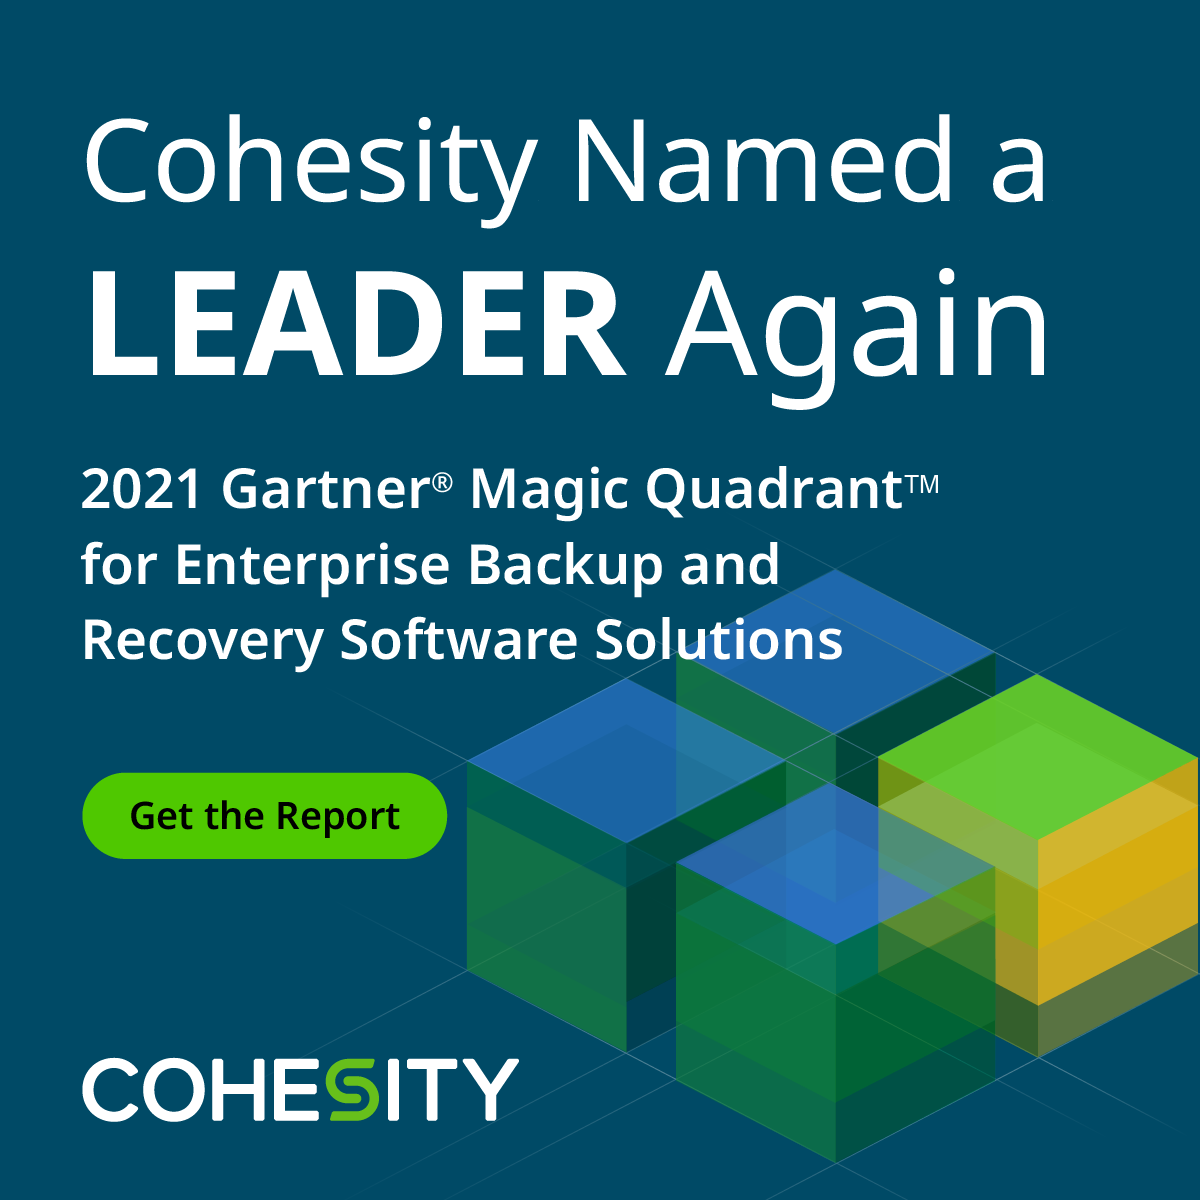 Cohesity Is Once Again Named a Leader in the 2021 Gartner® Magic Quadrant™ for Enterprise Backup and Recovery Software Solutions